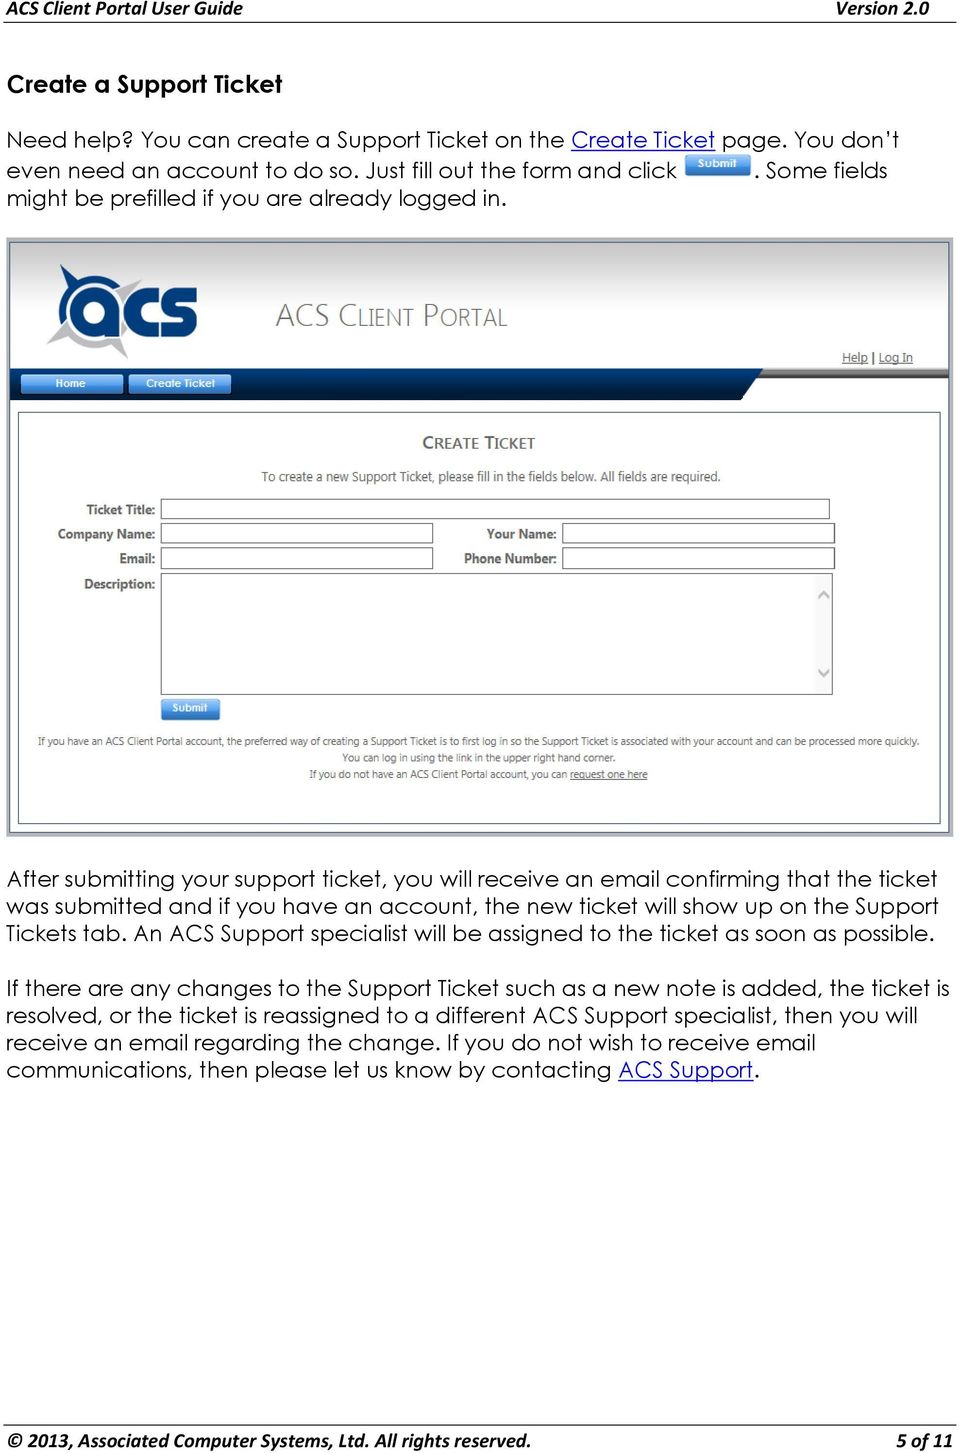 After submitting your support ticket, you will receive an email confirming that the ticket was submitted and if you have an account, the new ticket will show up on the Support Tickets tab.